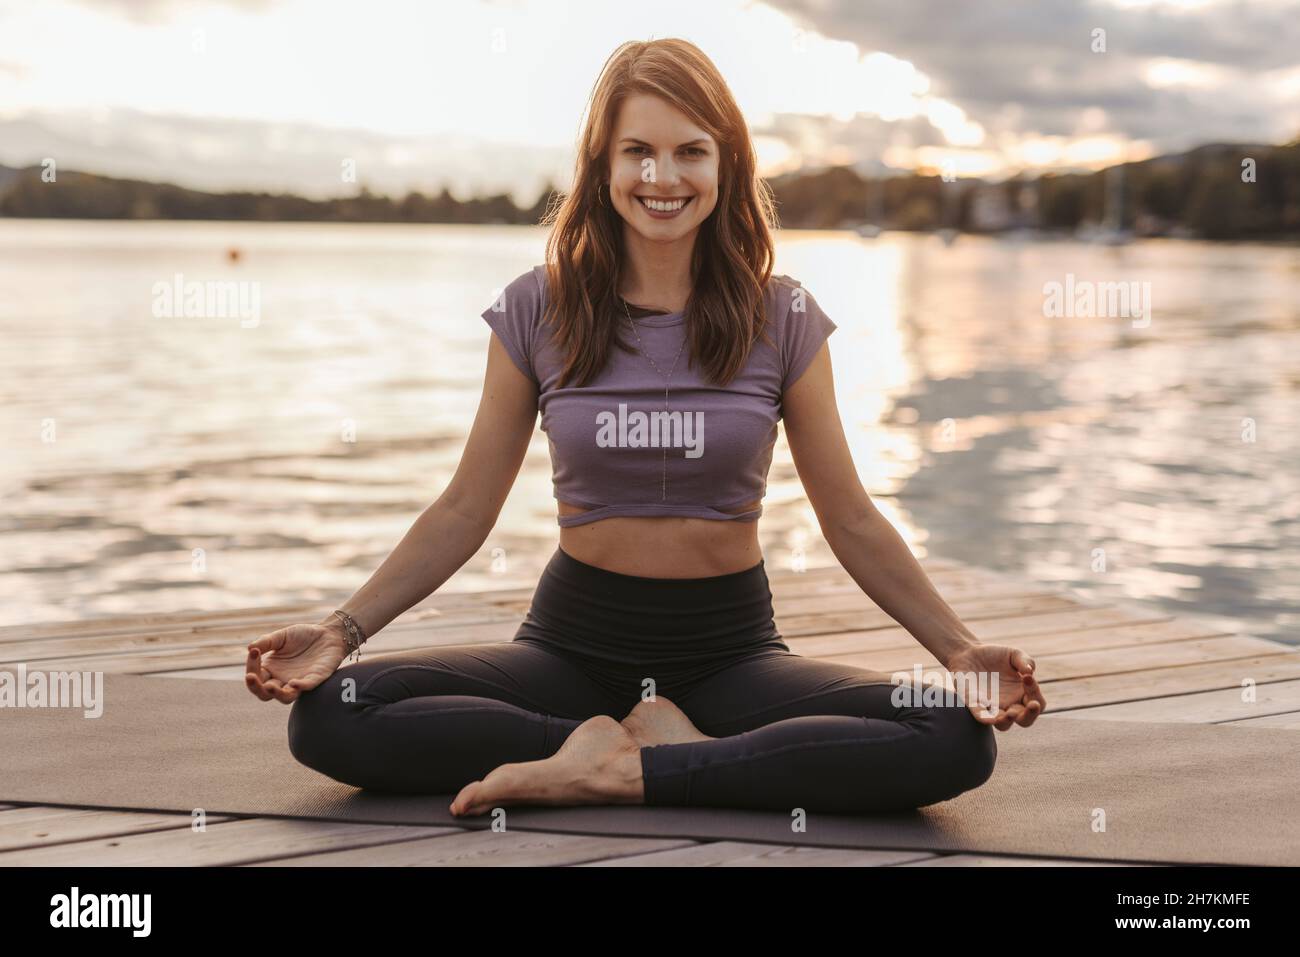 Smiling woman practicing lotus position while sitting on exercise mat by lake during sunset Stock Photo